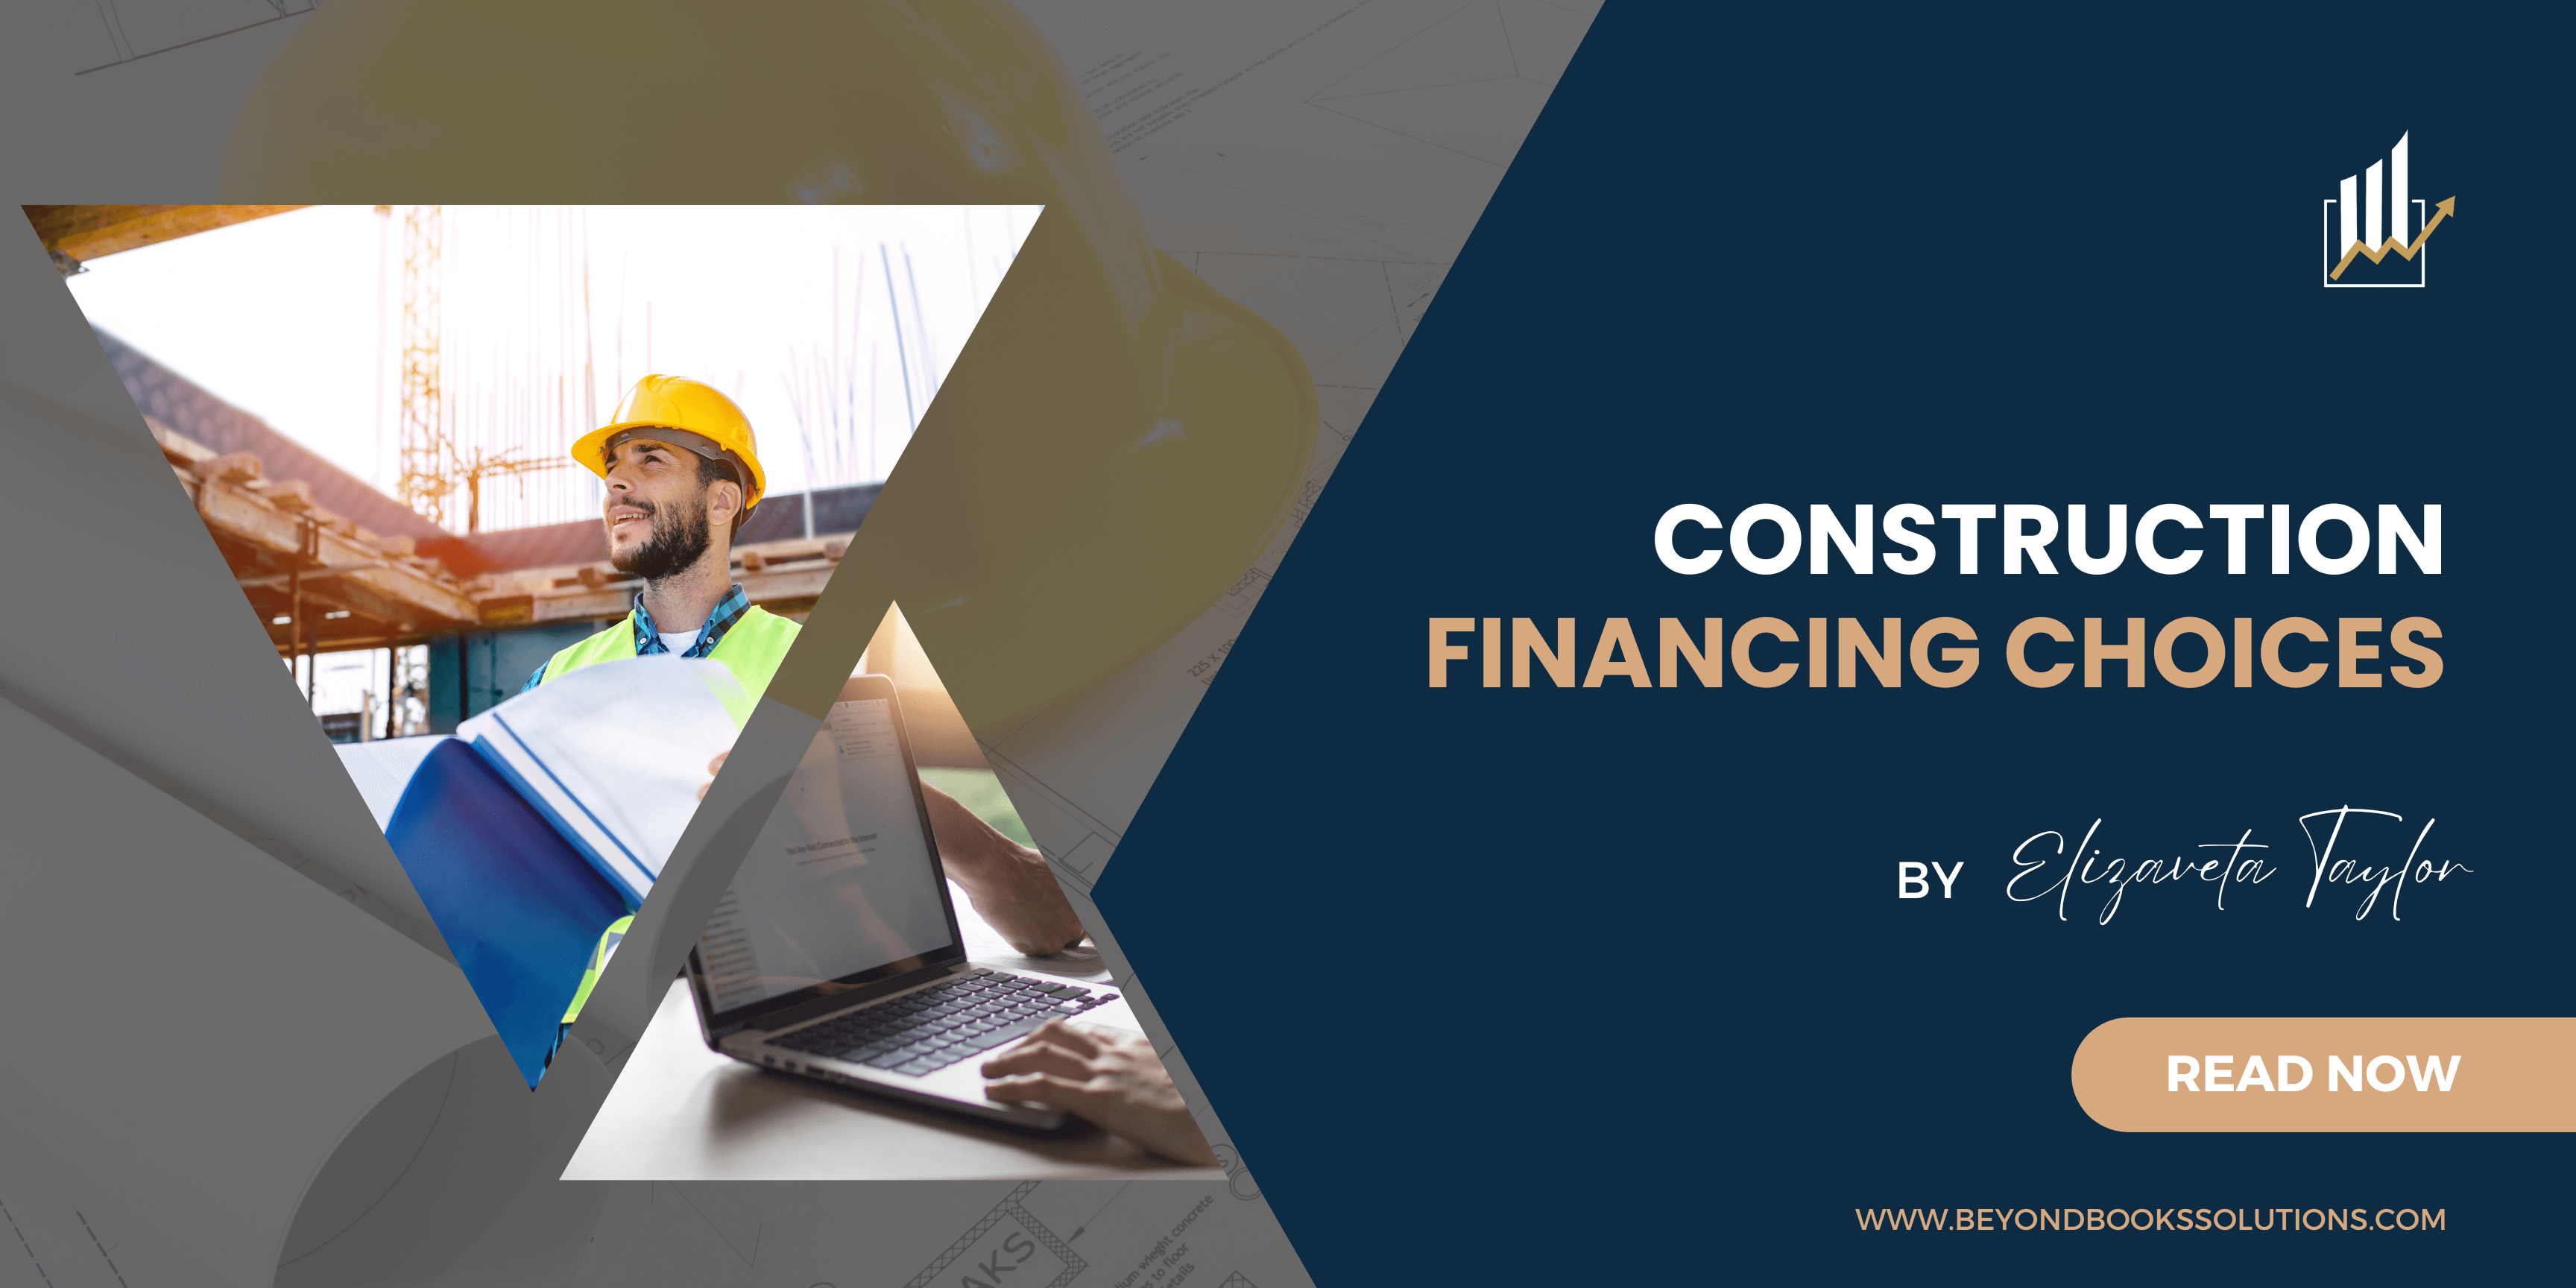 Construction Financing Choices